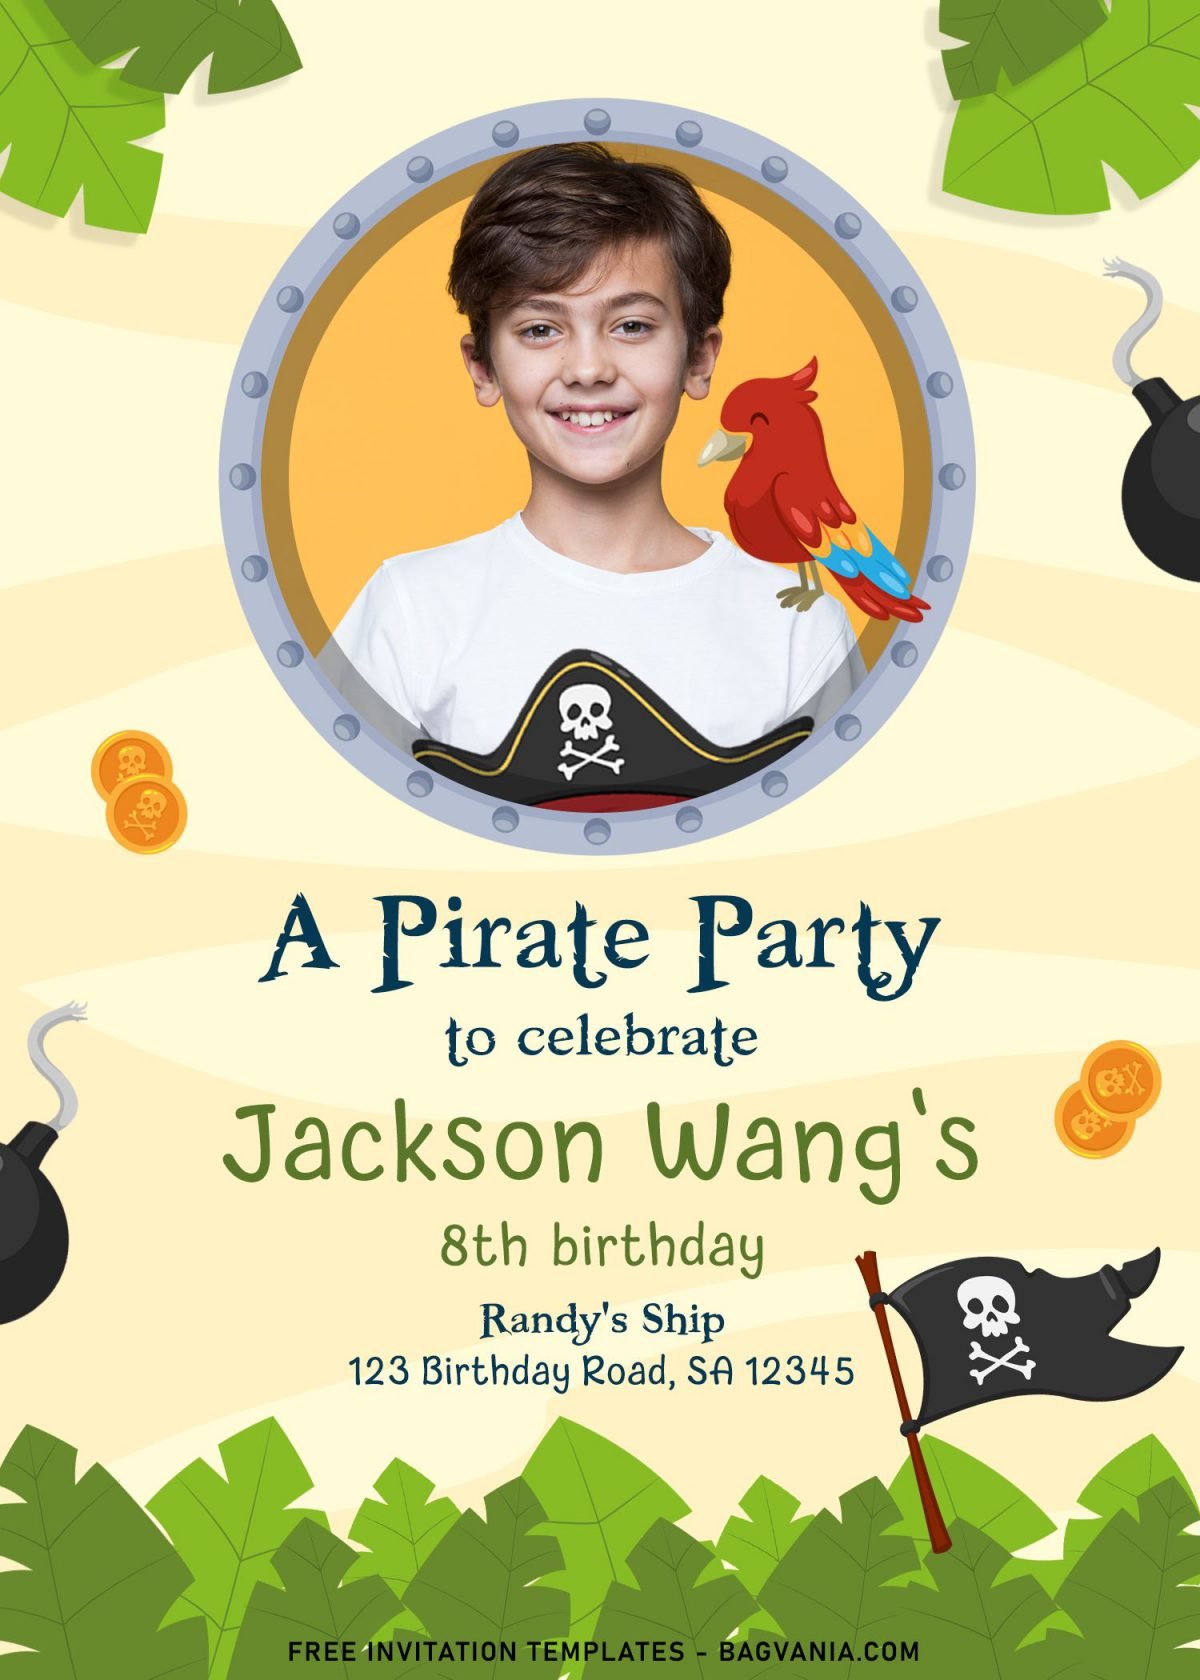 9+ Cute Pirate Birthday Invitation Templates For Your Son's Upcoming Birthday